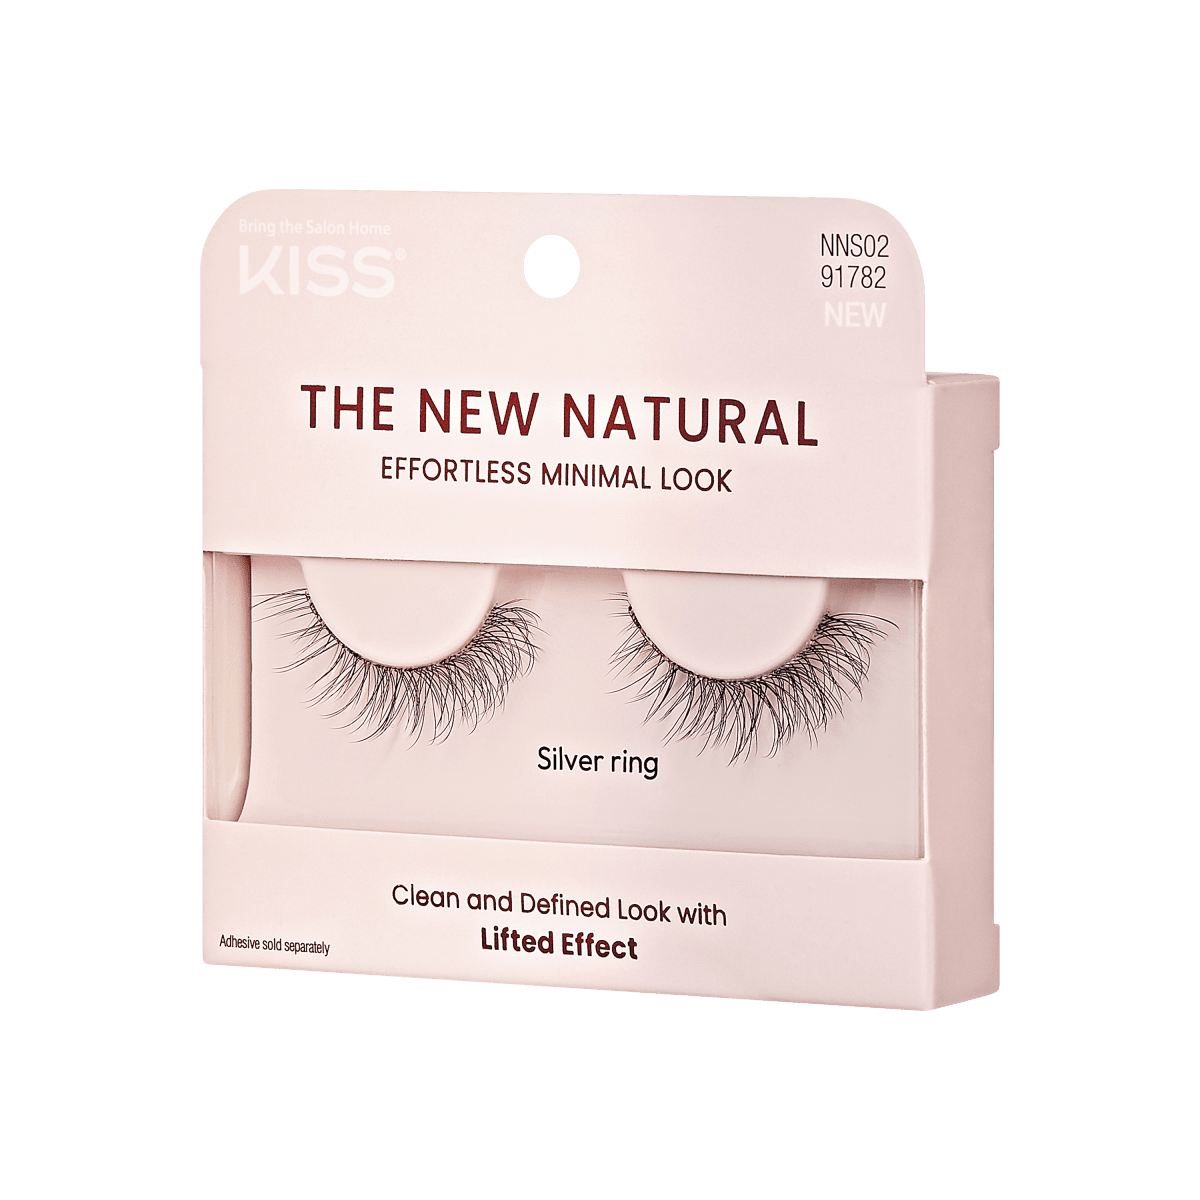 A package of Eylure false eyelashes from the KISS The New Natural collection in the style, Silver ring